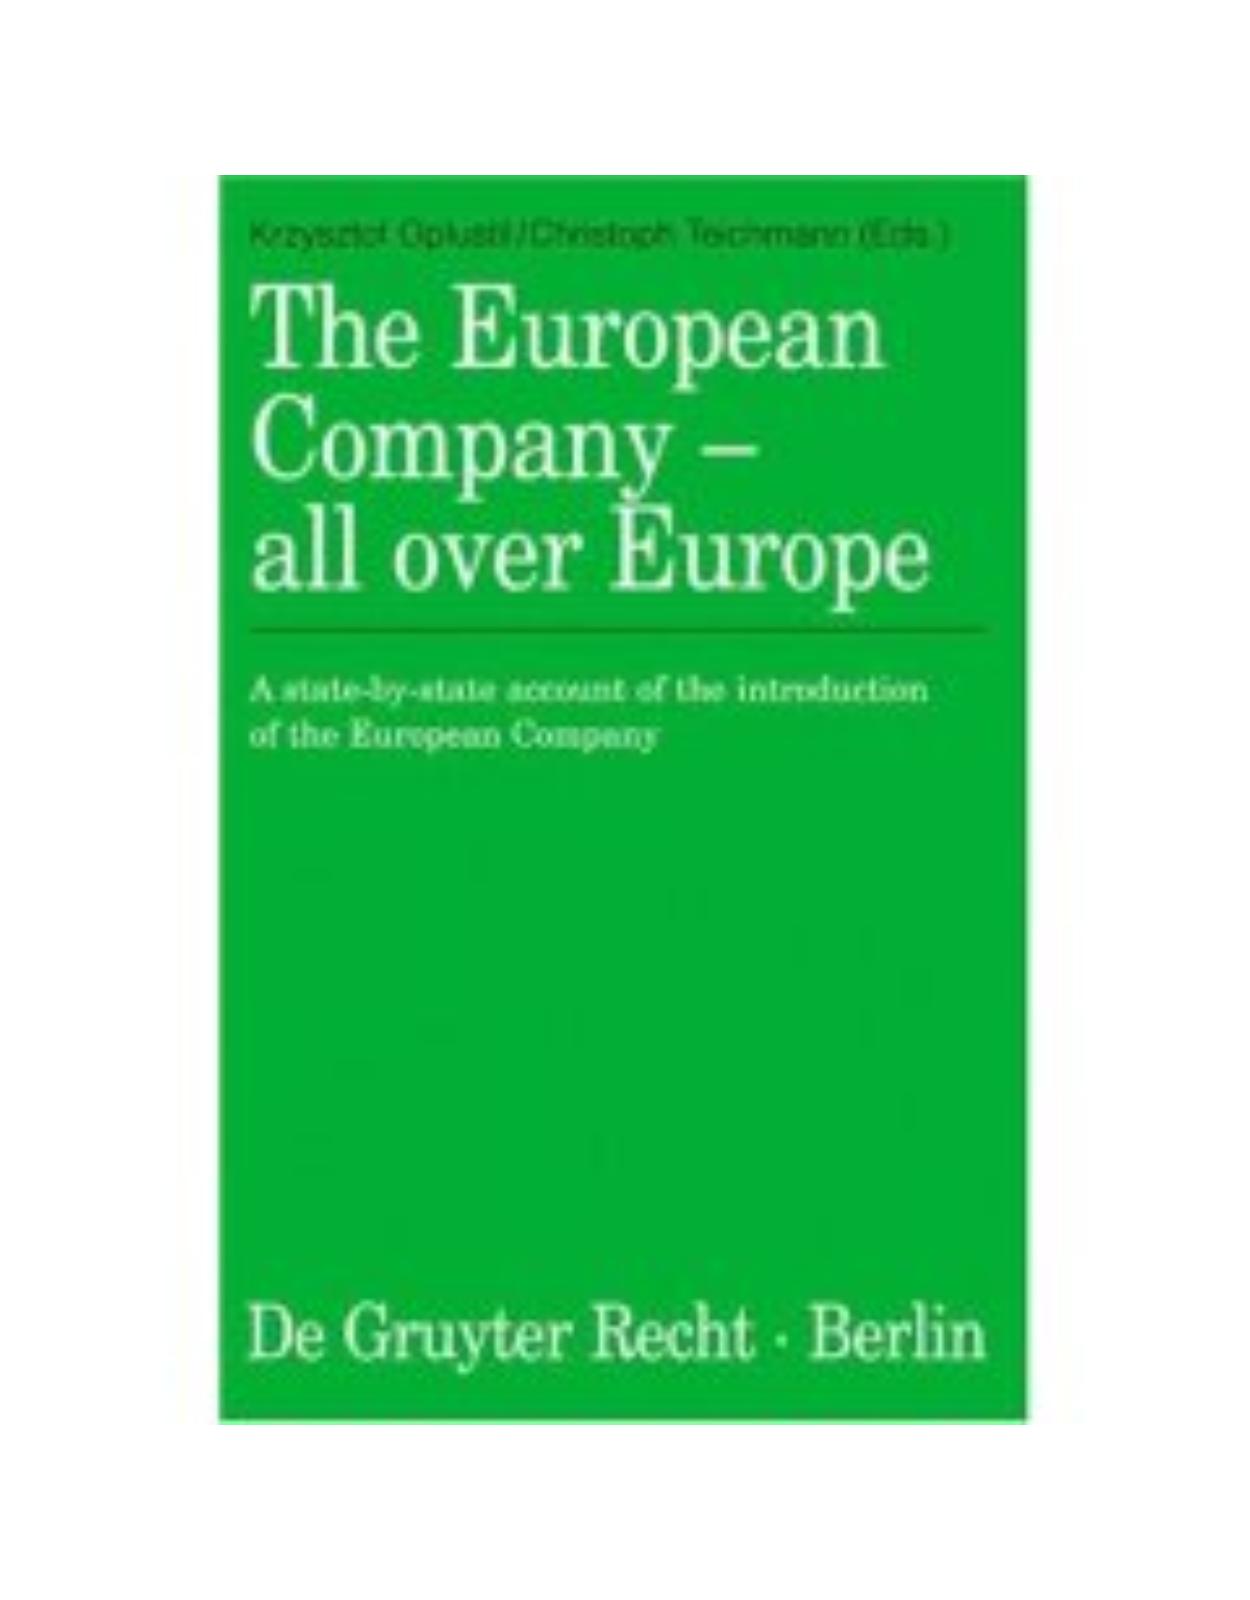 The European Company – all over Europe